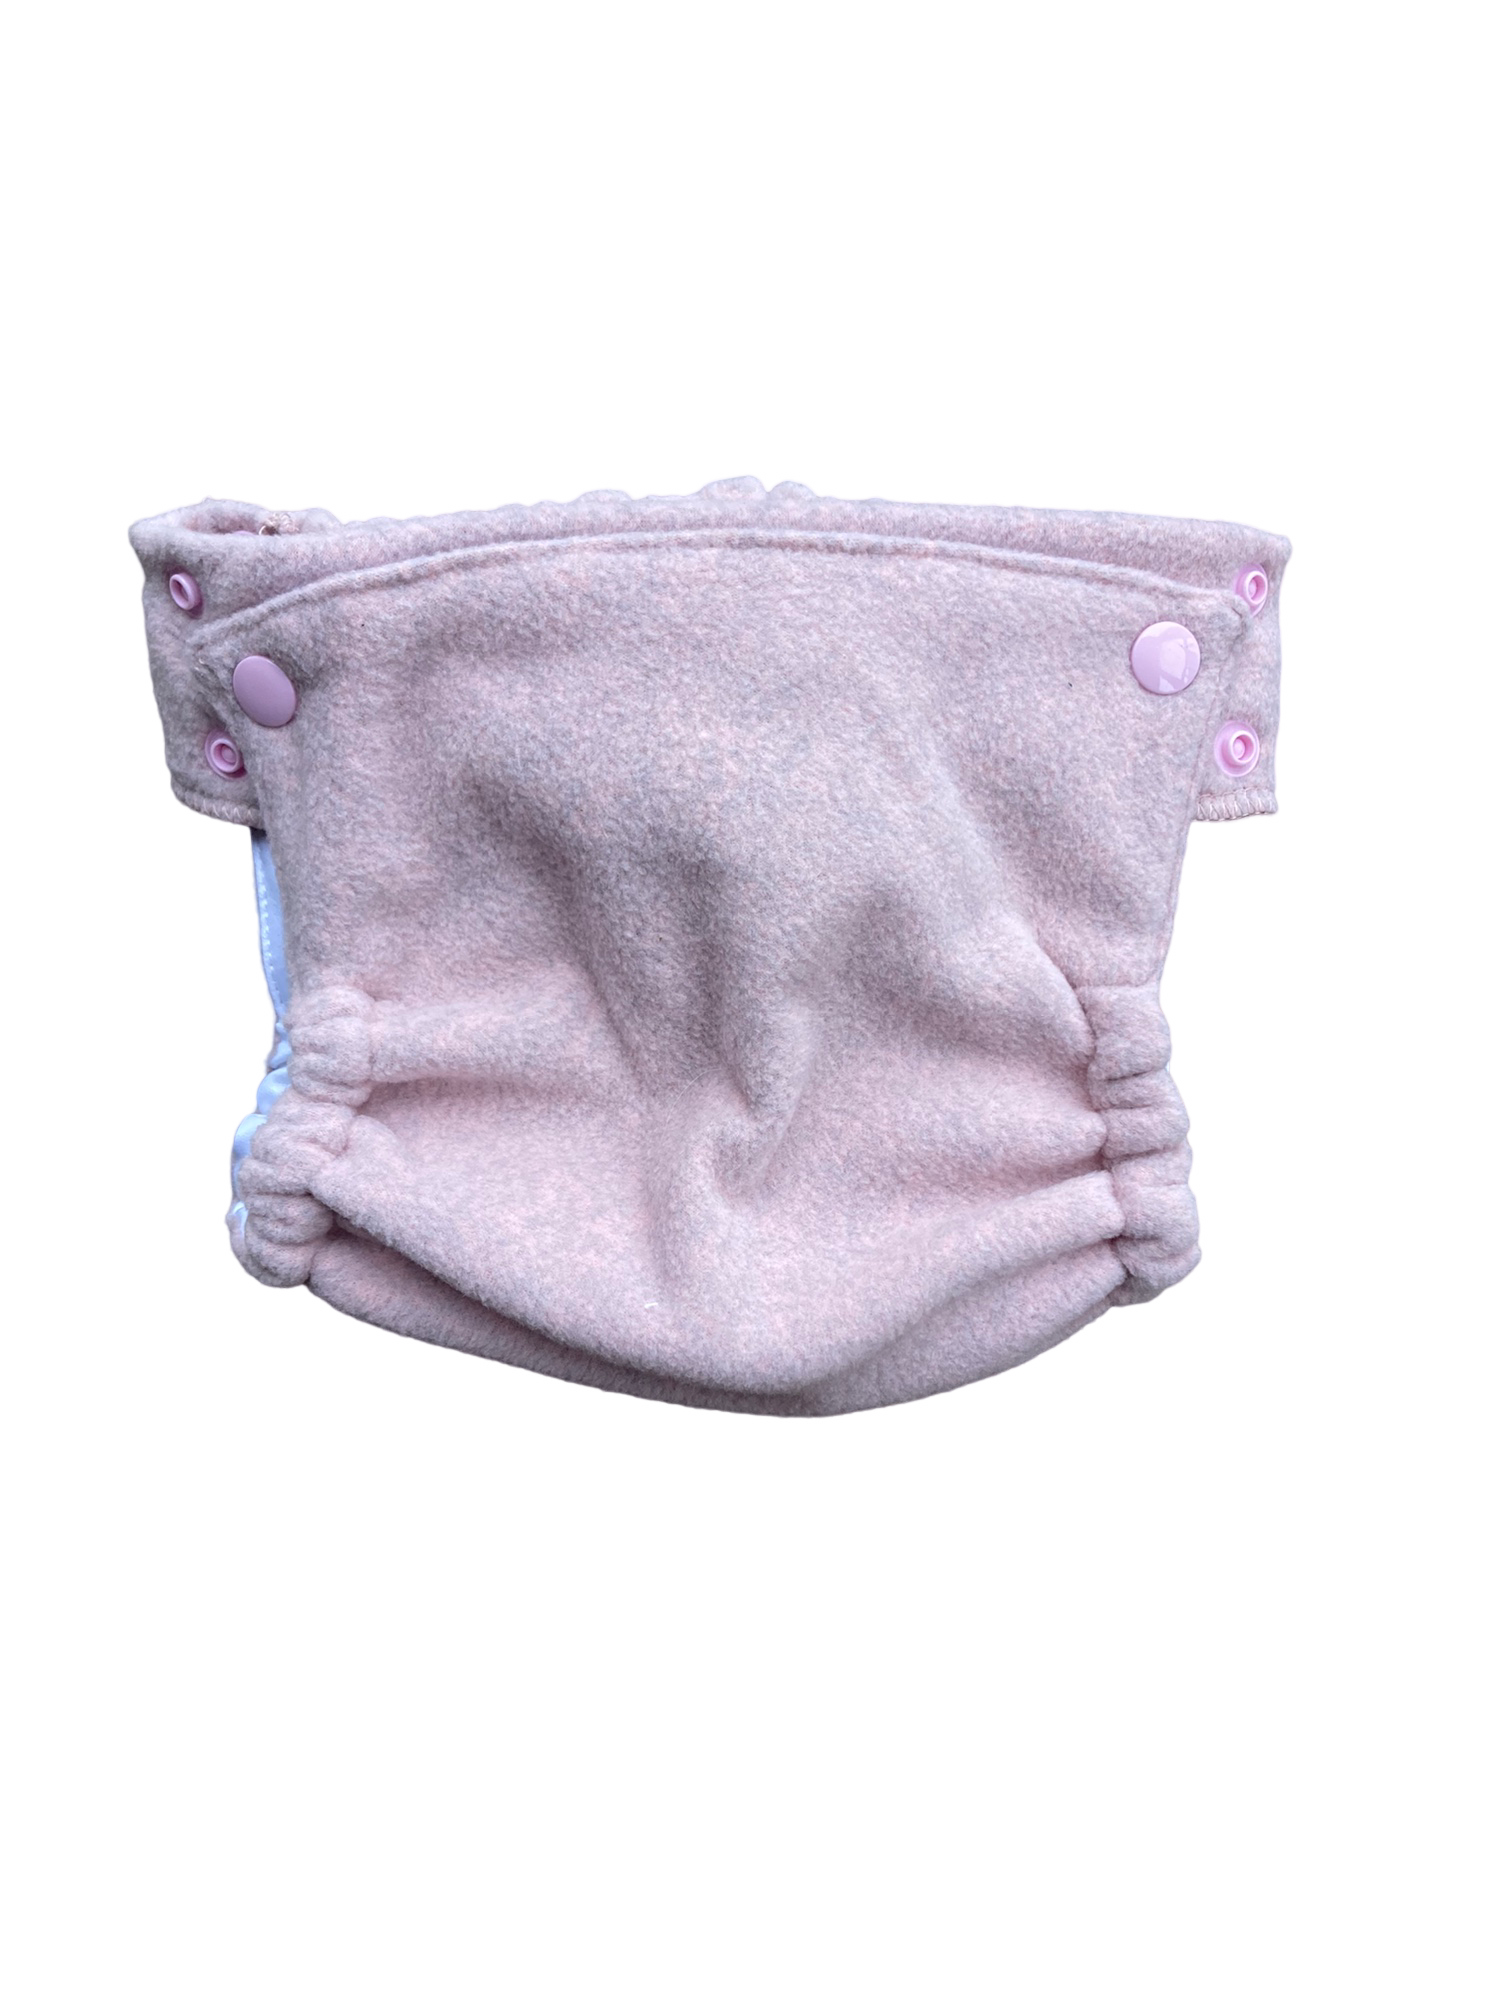 All-In-Two Diaper and Belt (PUL/Fleece)